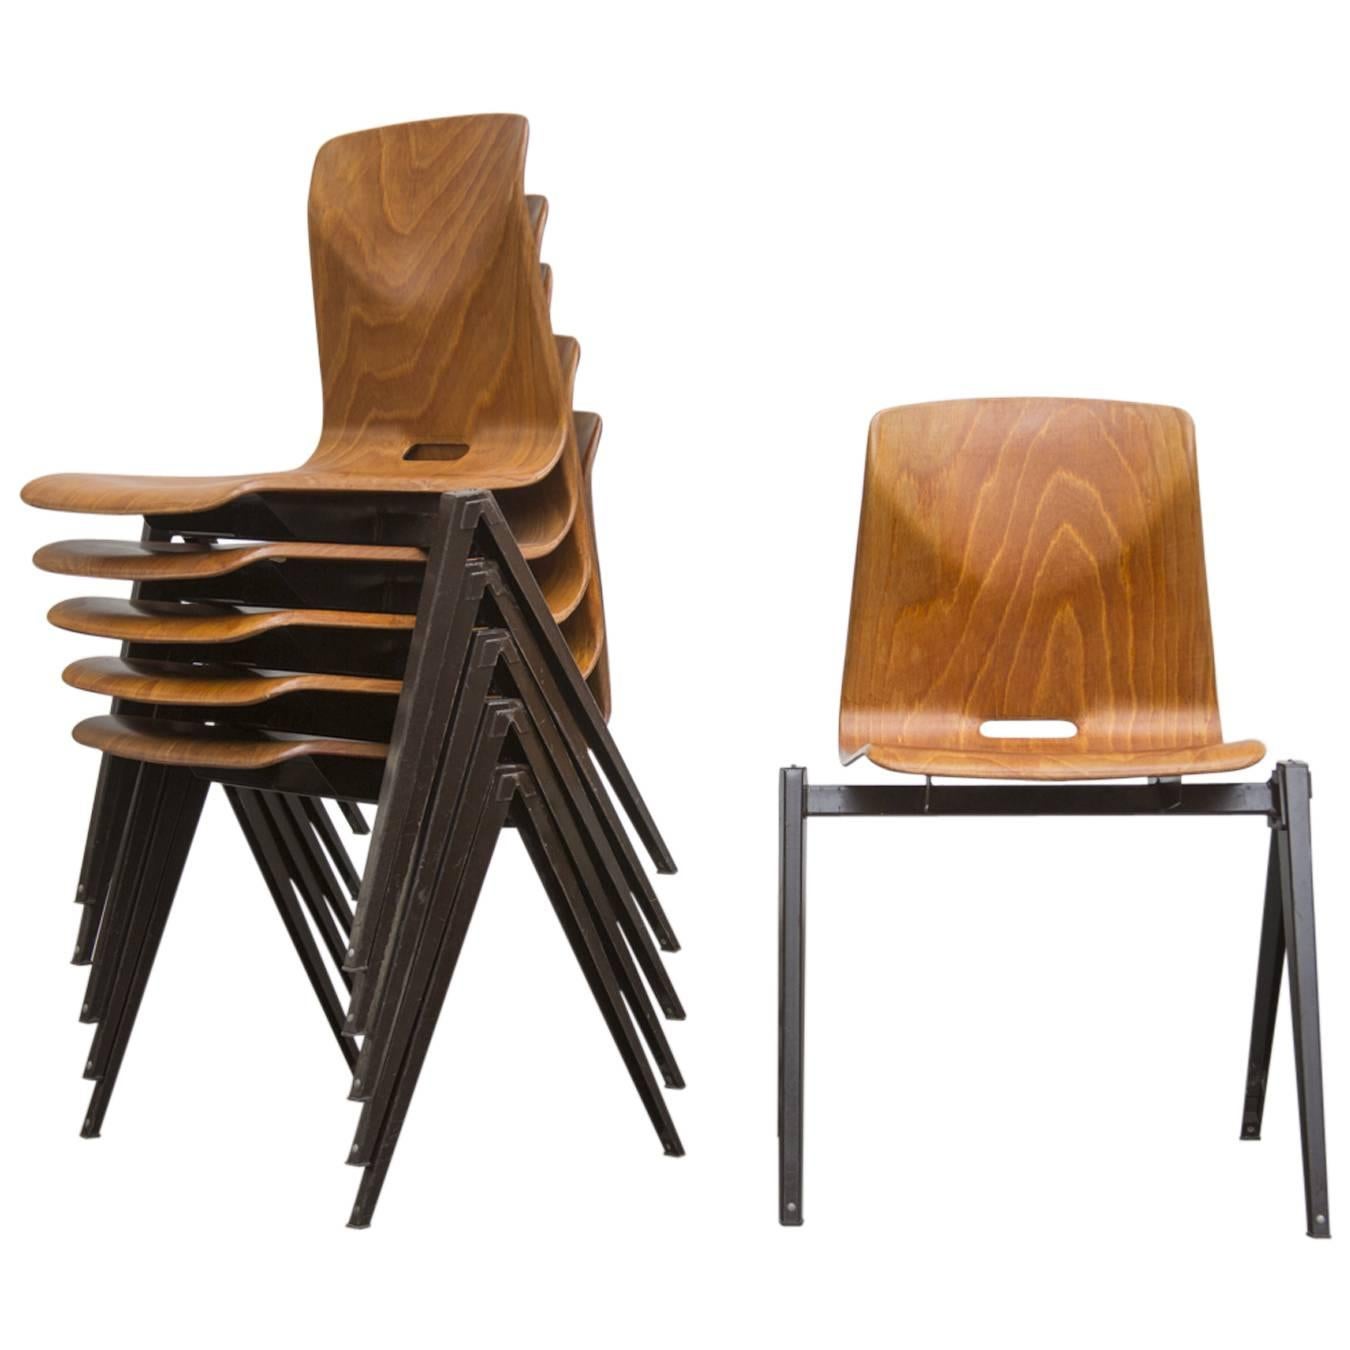 Prouve Style Single Shell Stacking Chair